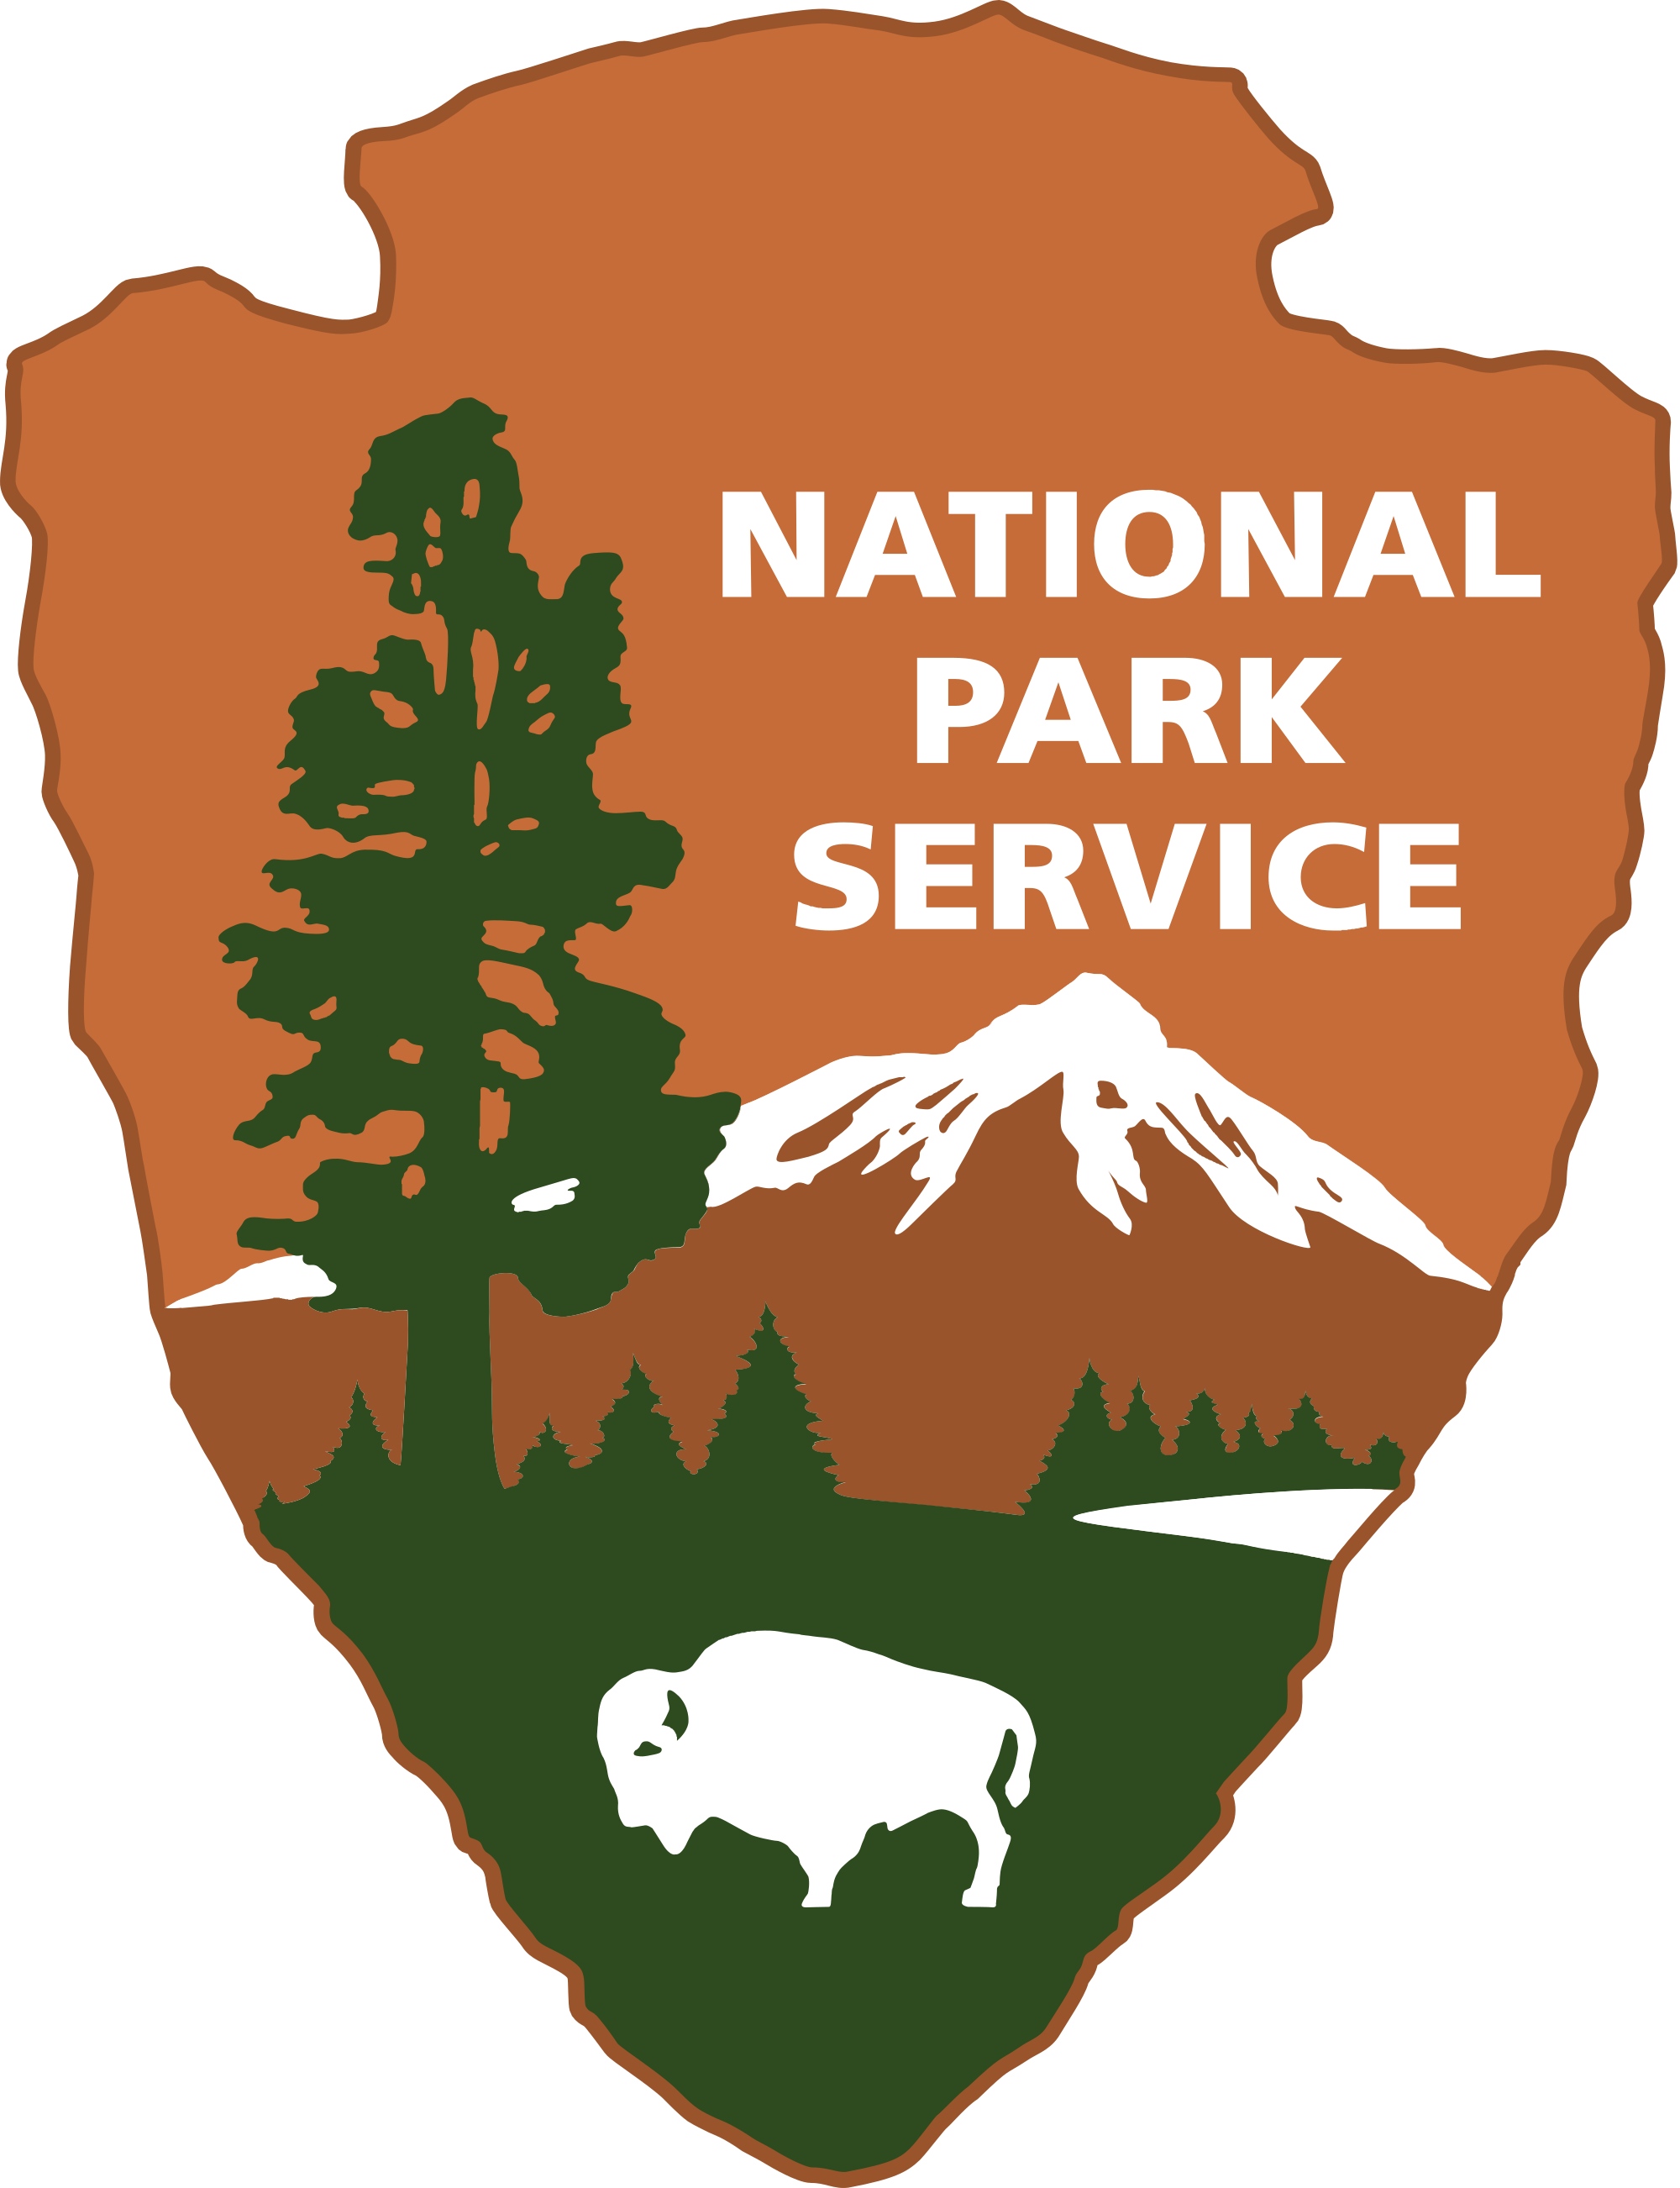 National Park Service logo shaped like a shield with brown background and text